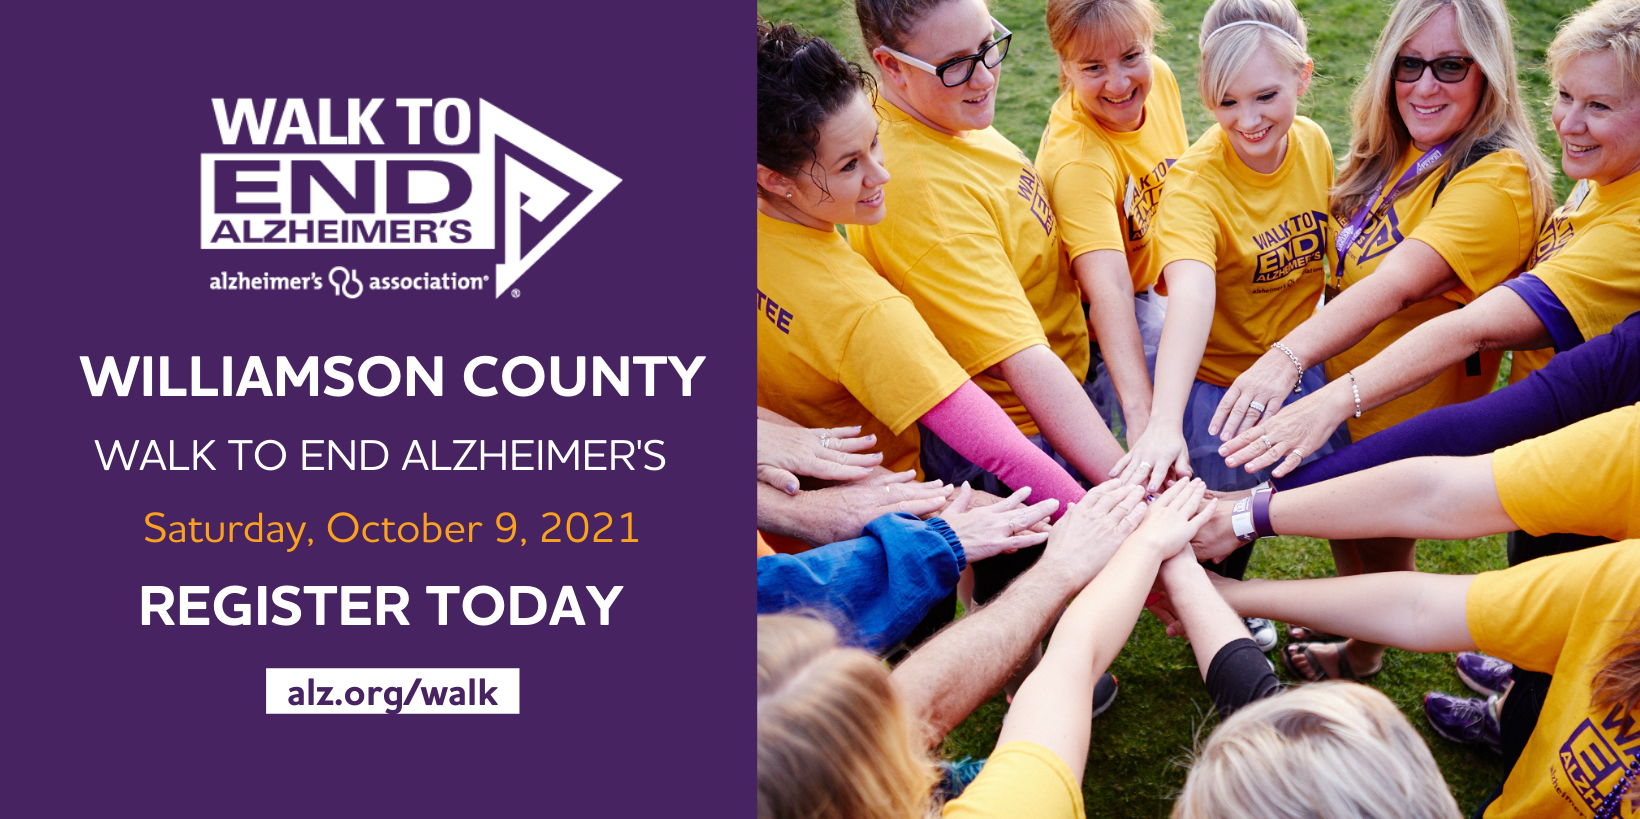 2021 Walk to End Alzheimer's - Williamson County promotional image